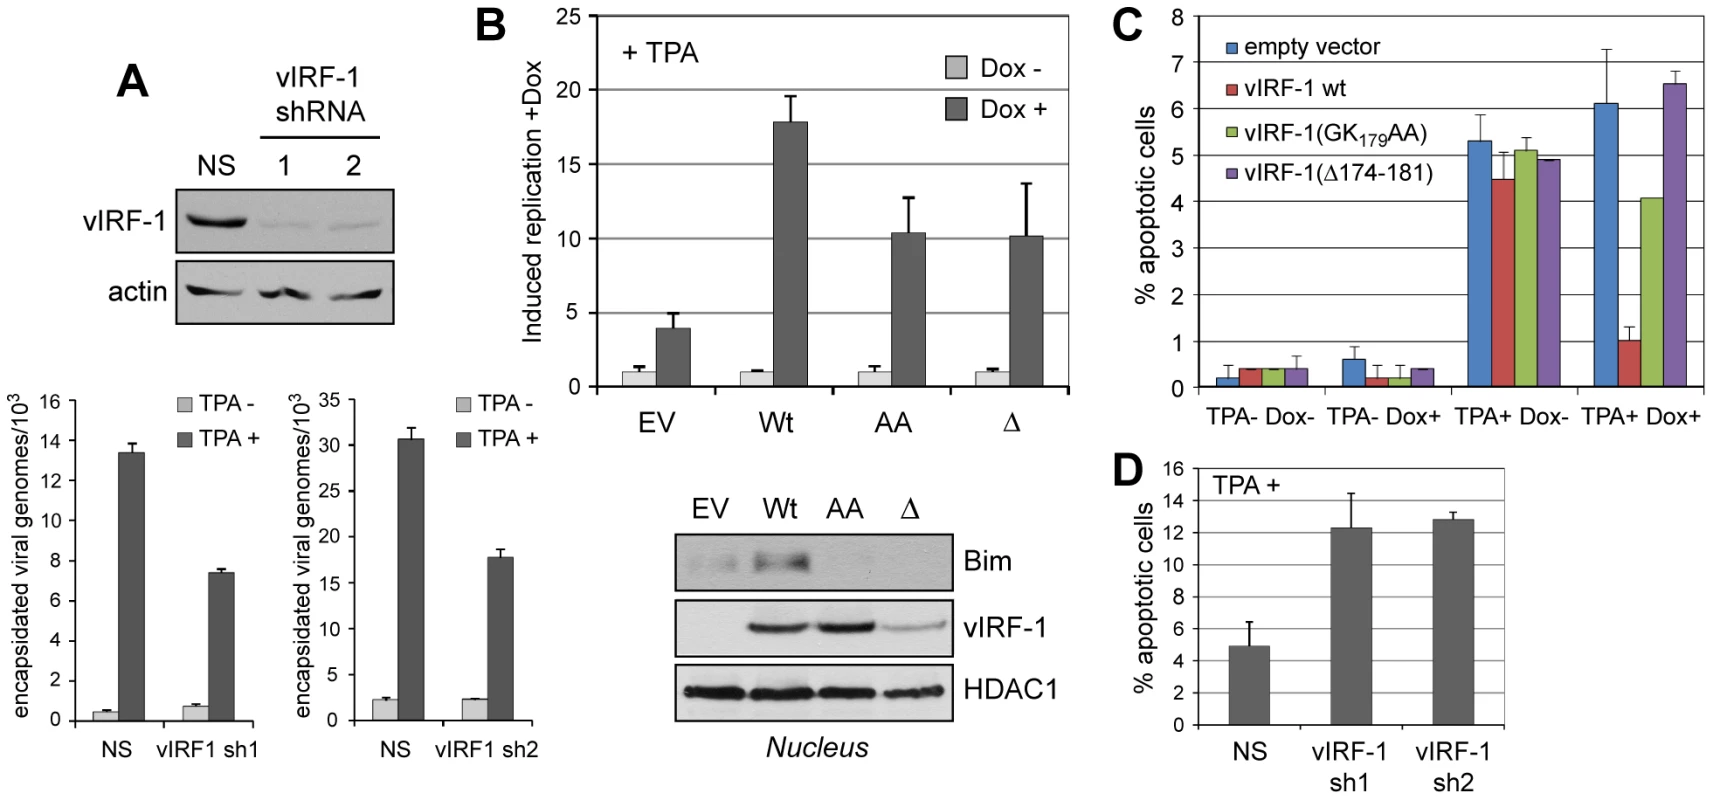 vIRF-1 function and significance of vIRF-1:Bim interaction in the context of virus infection.